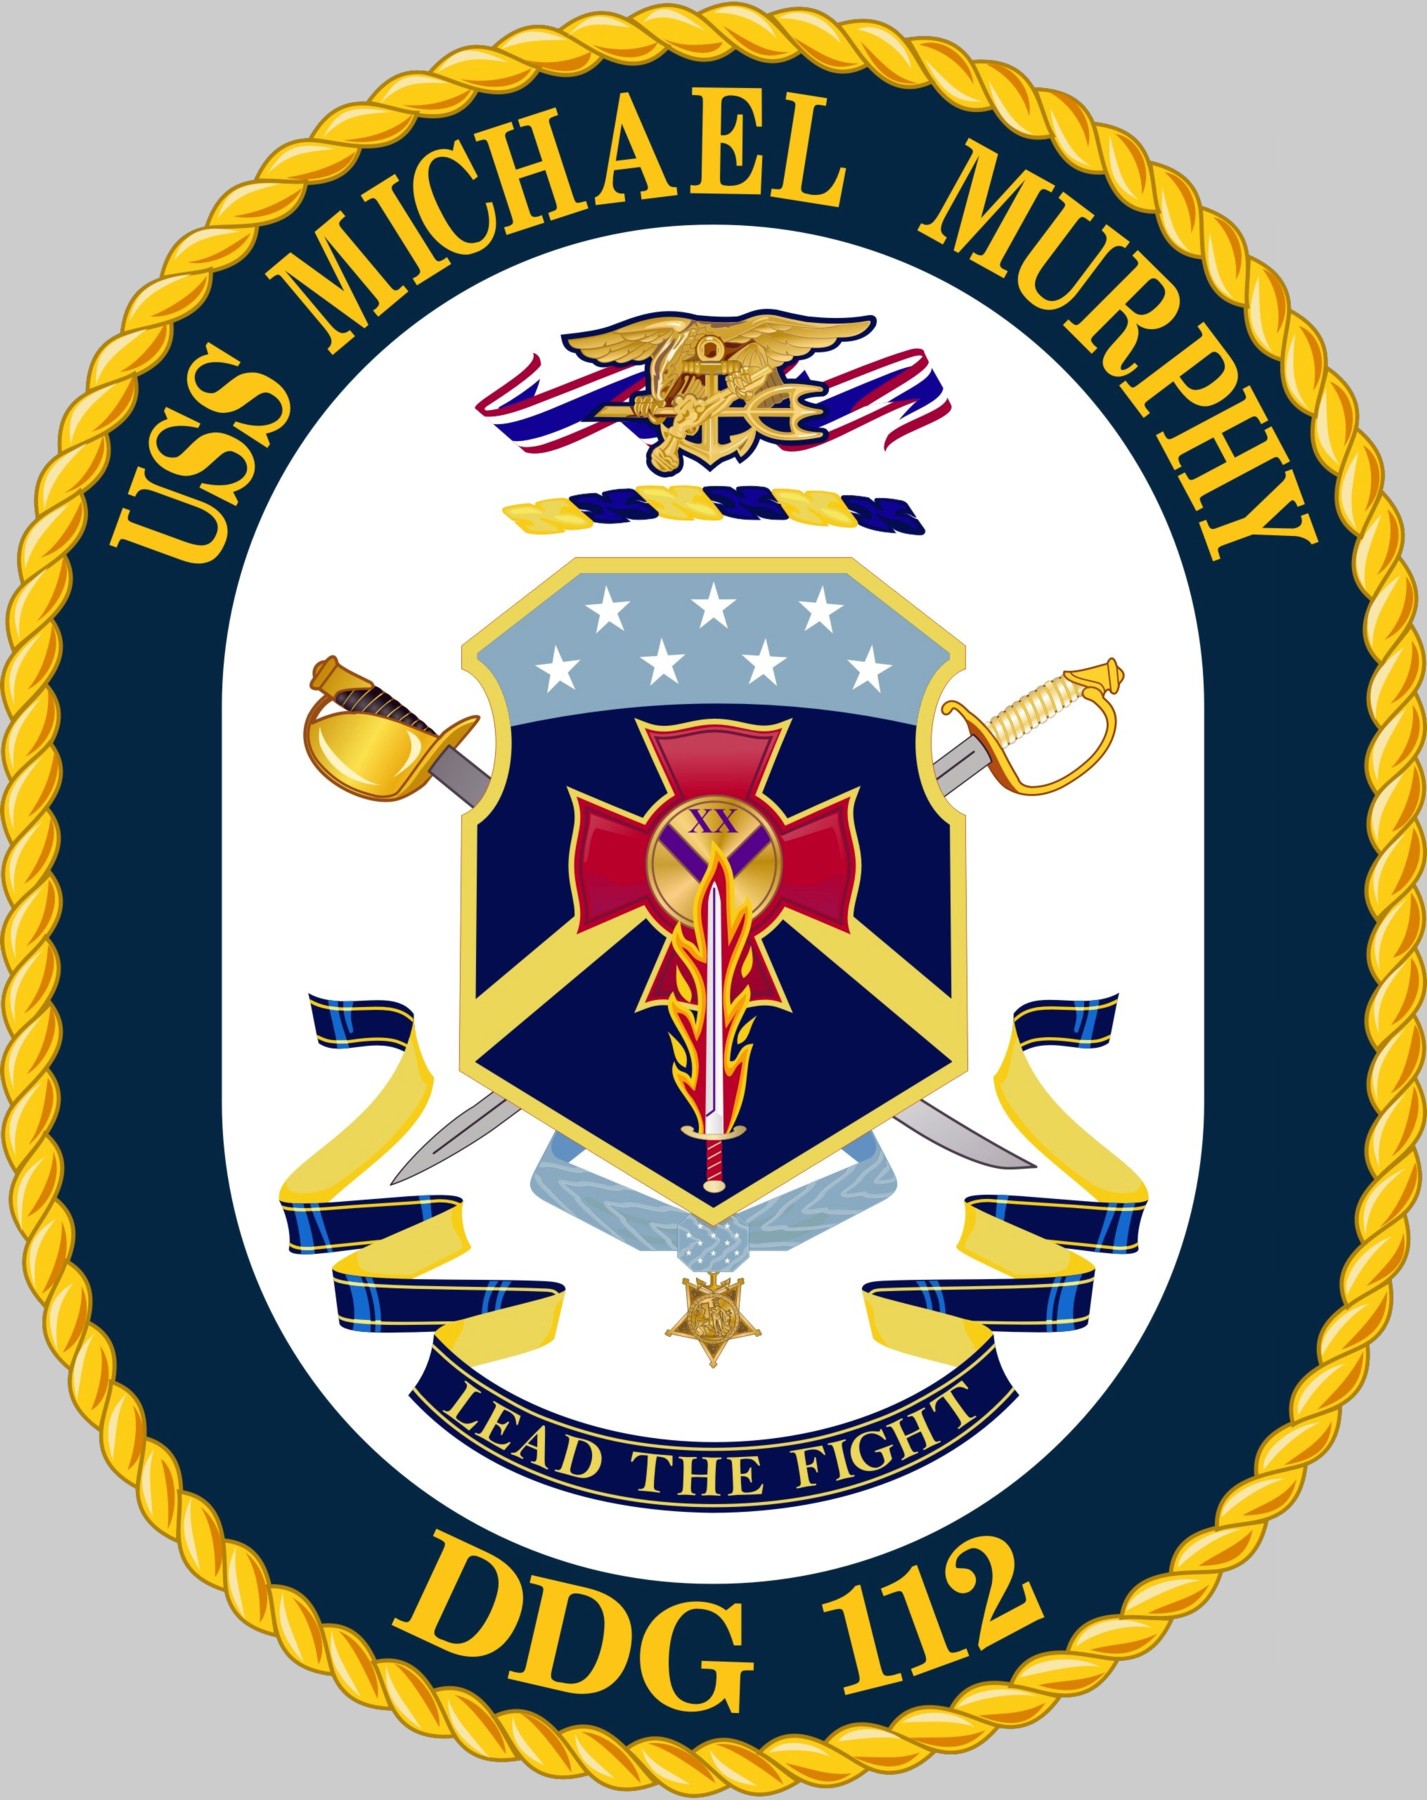 ddg-112 uss michael murphy insignia crest patch badge arleigh burke class guided missile destroyer us navy 02c